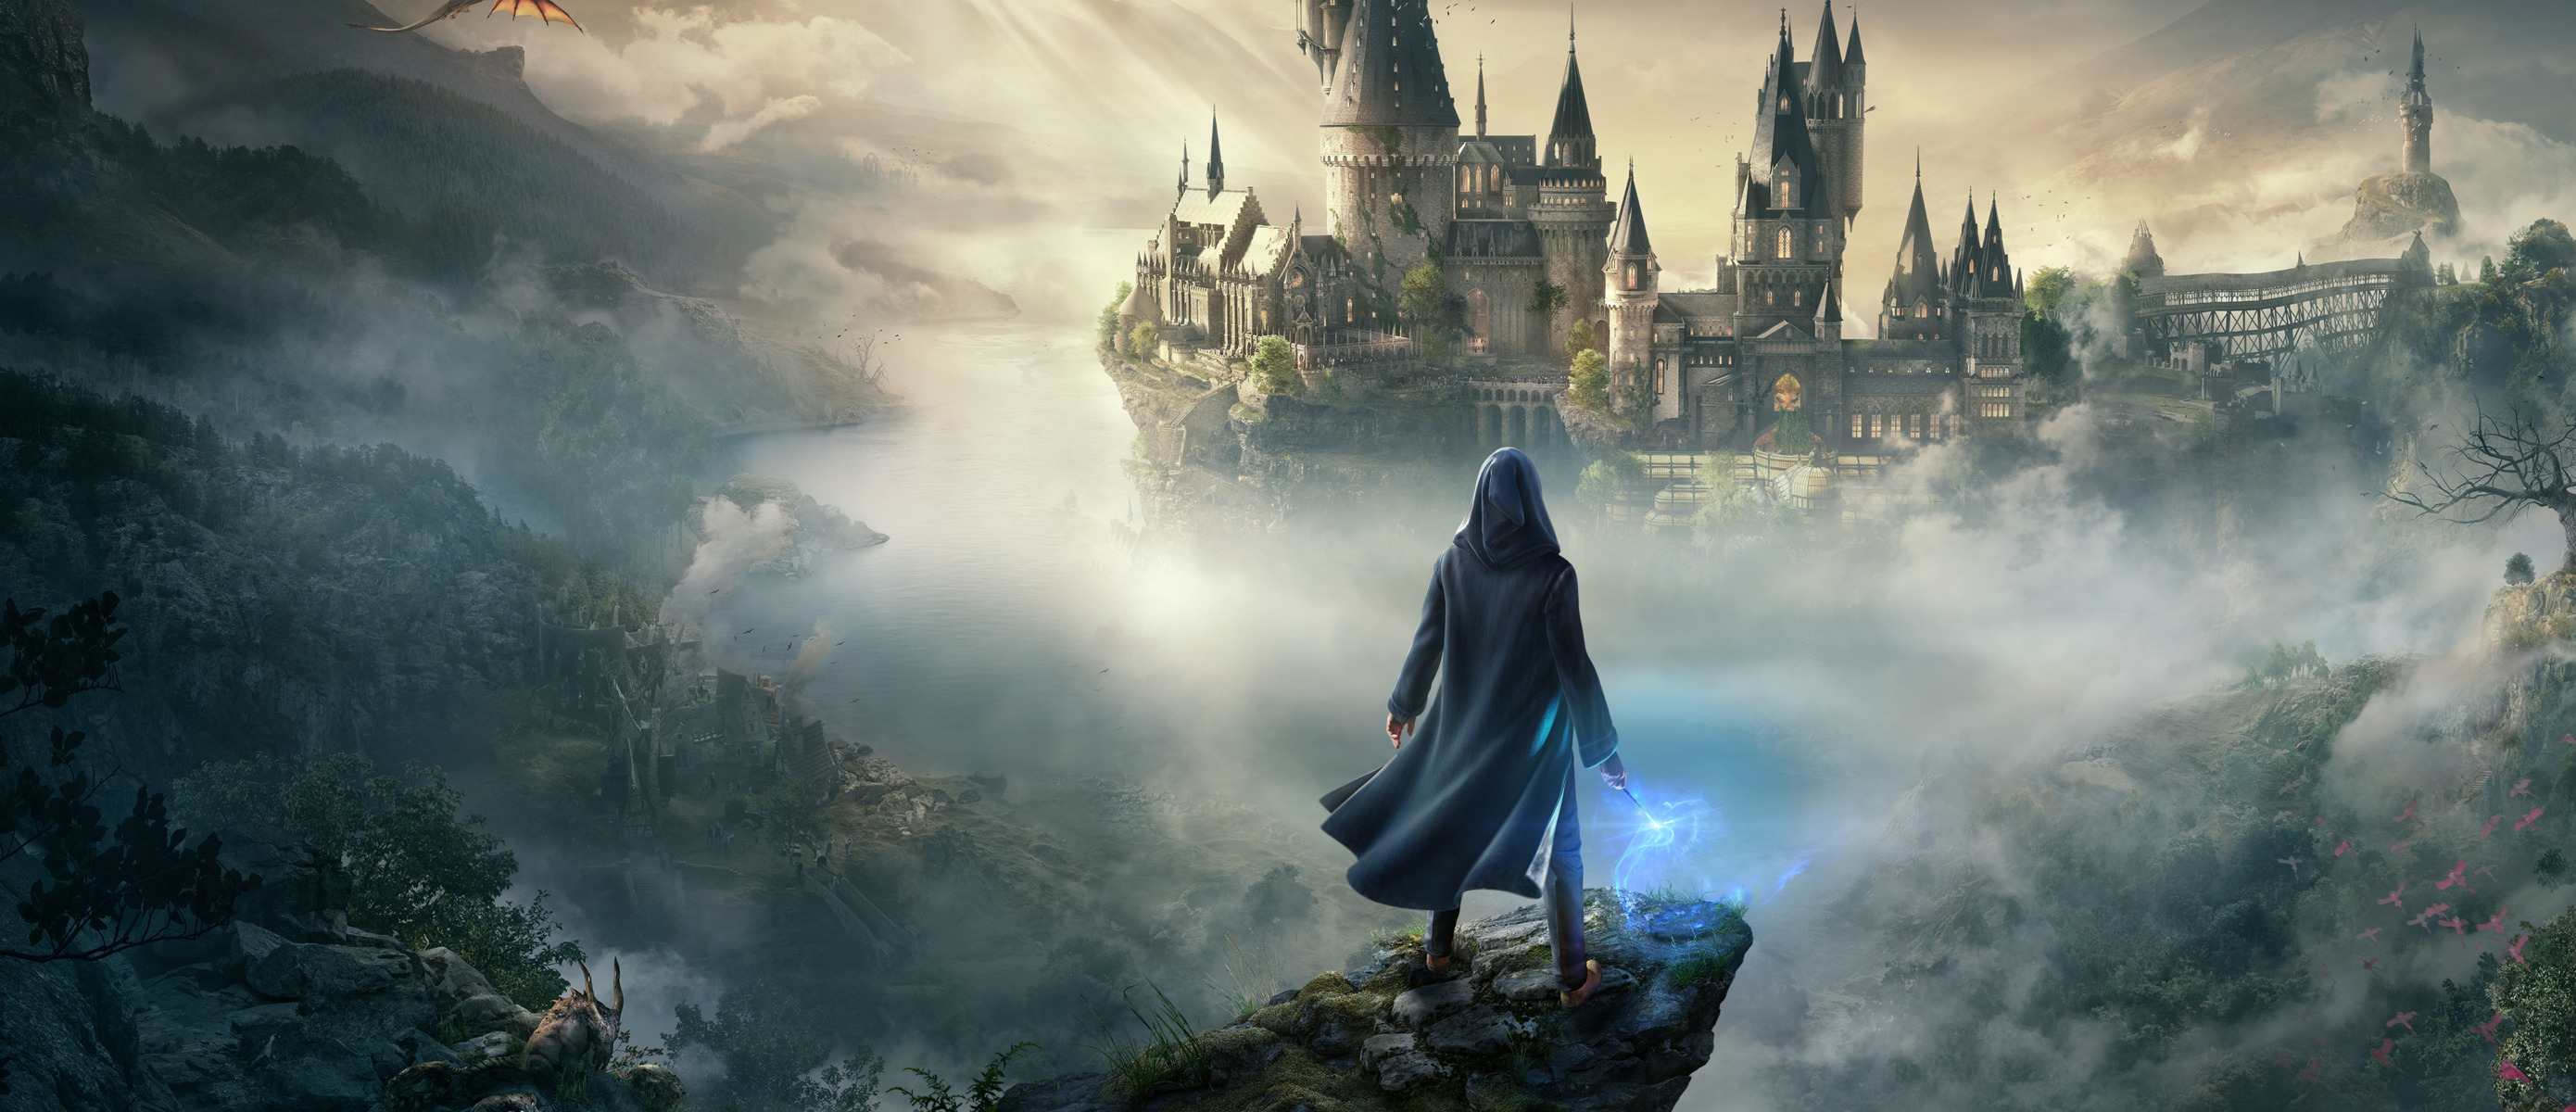 Find Out When Hogwarts Legacy is Coming Out on PS4 and Prepare for the Sexiest Gaming Experience Yet!